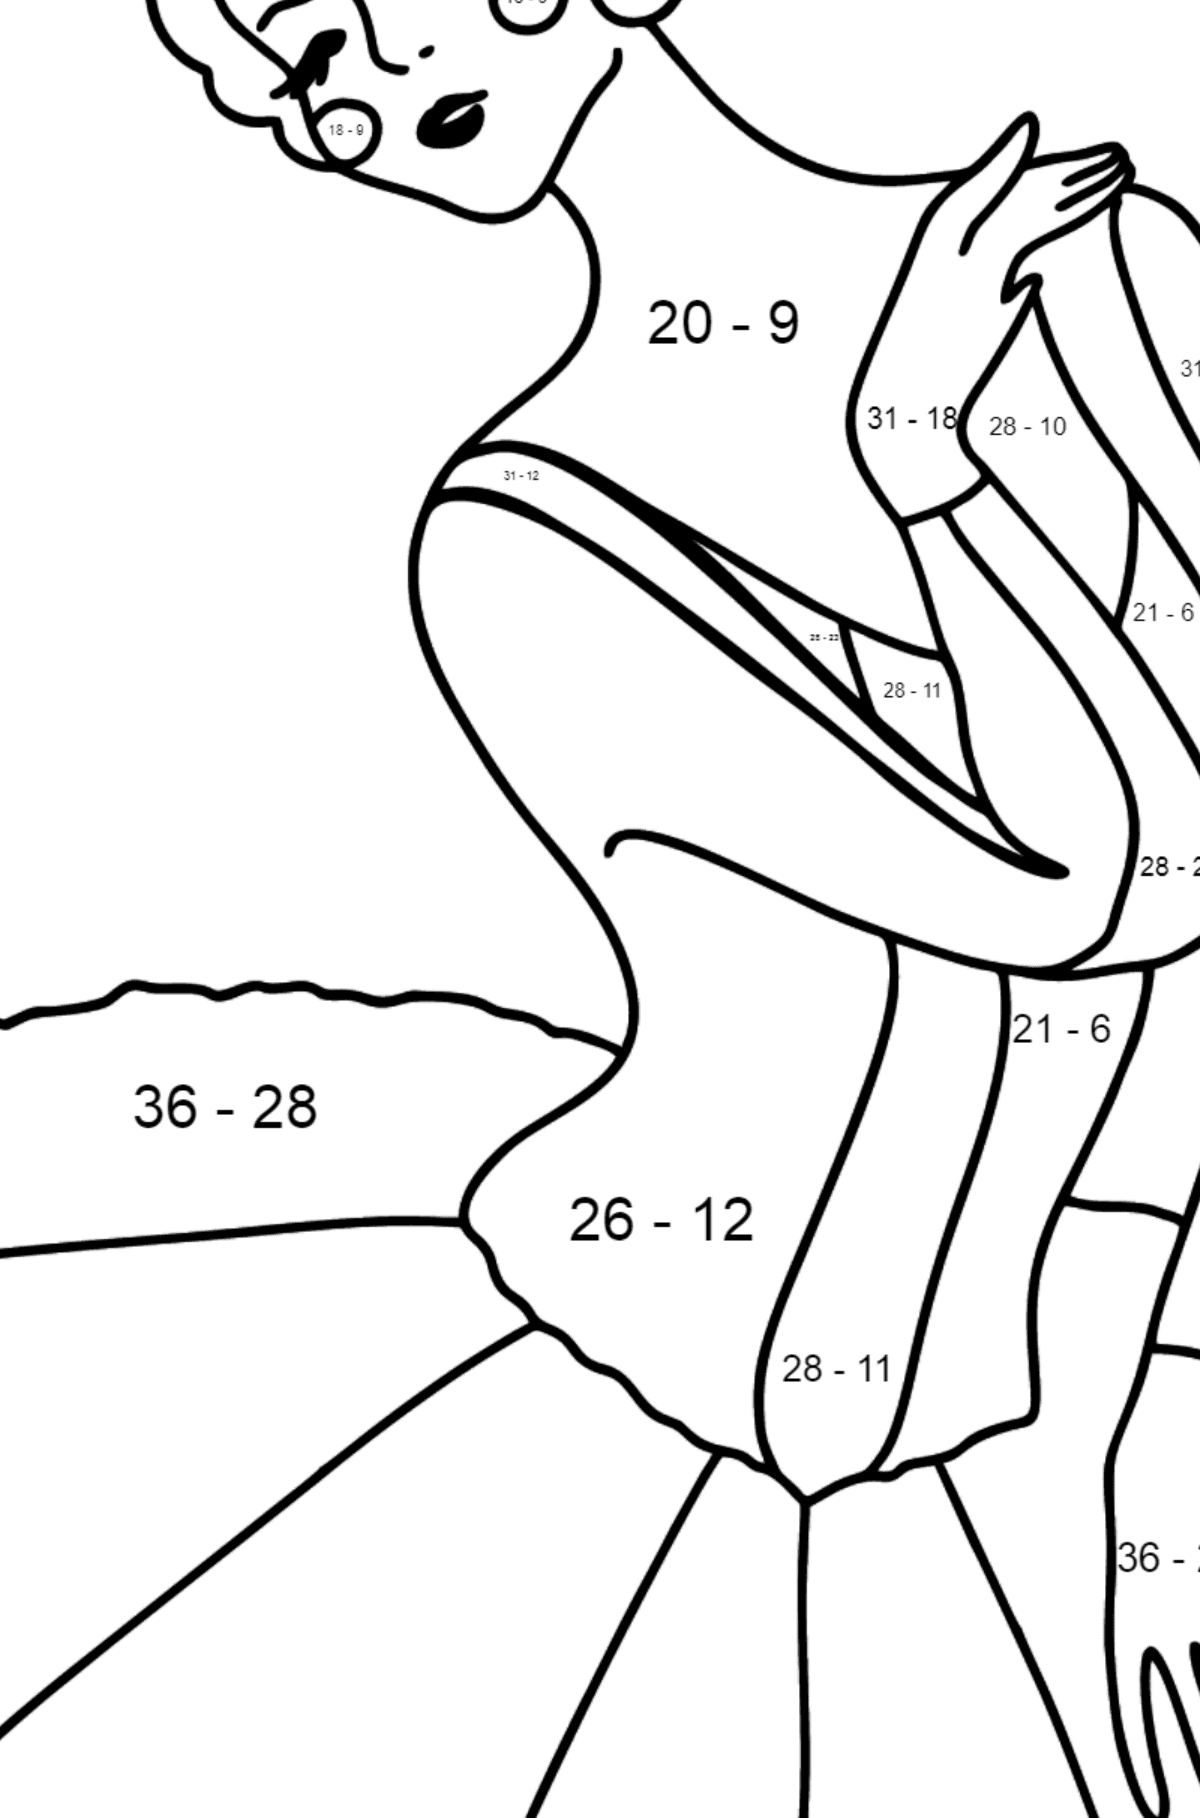 Ballerina in Tutu Skirt coloring page - Math Coloring - Subtraction for Kids